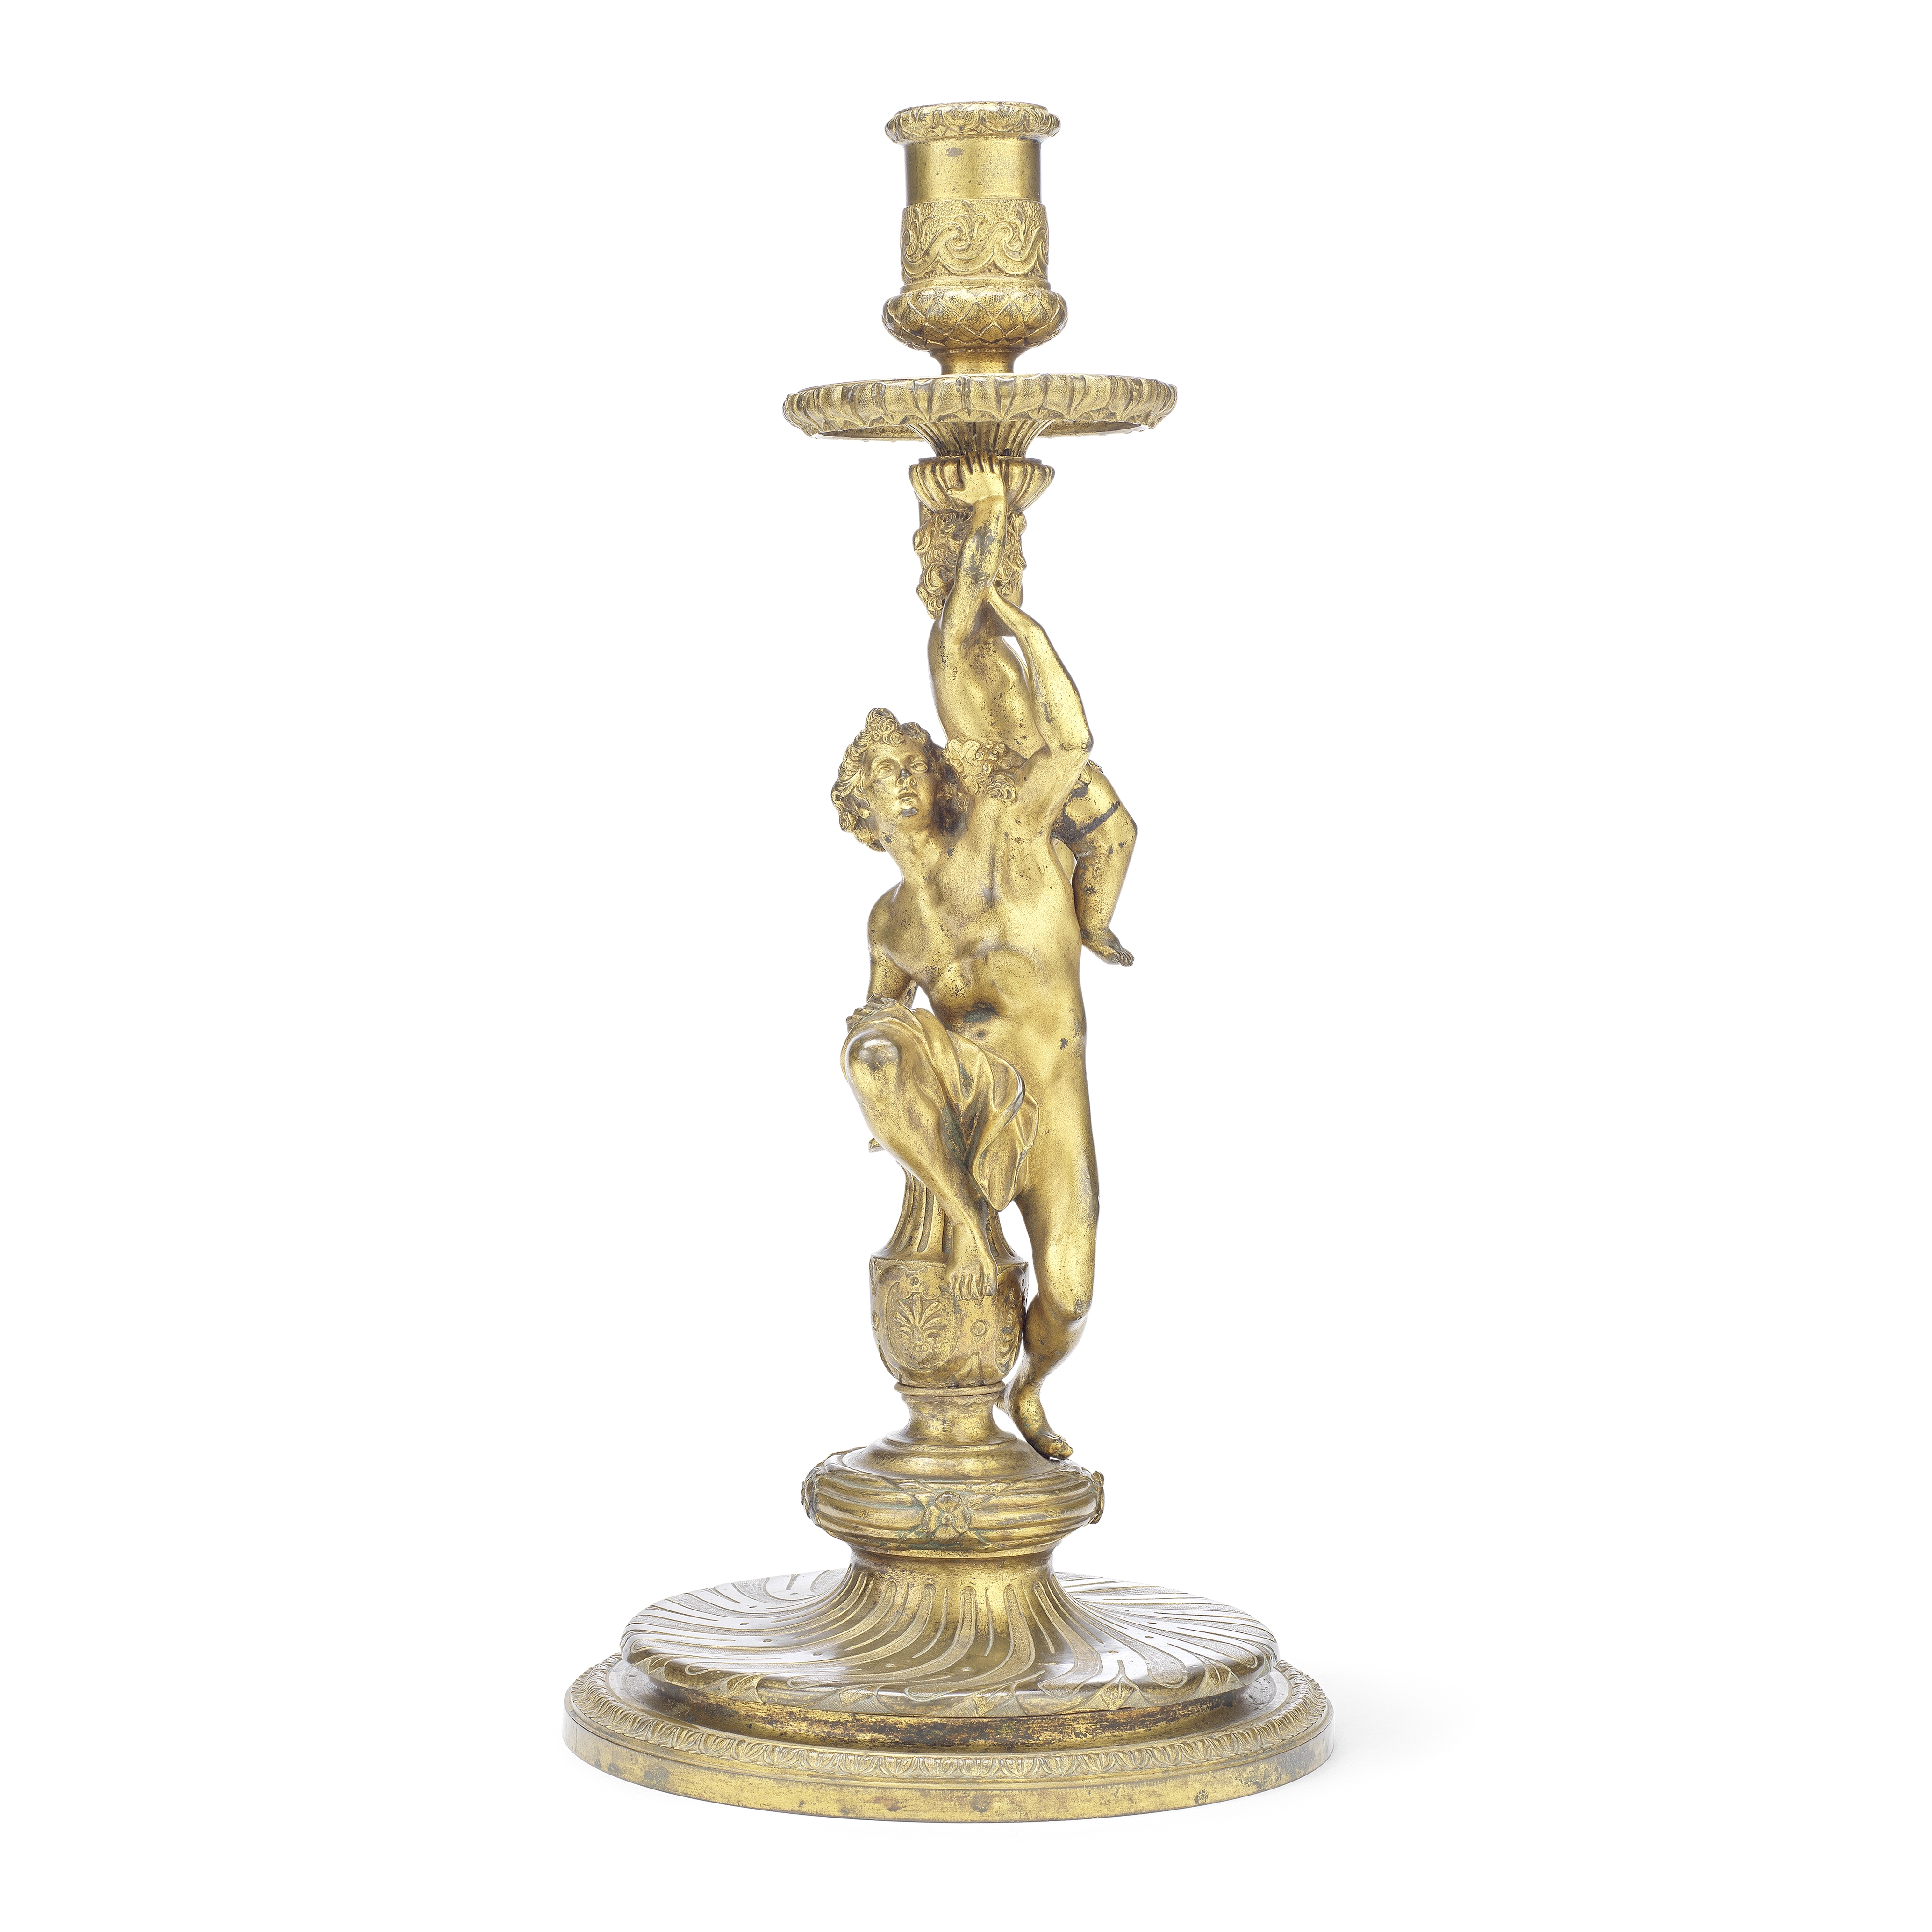 A French gilt bronze figural candlestick In the manner of Corneille Van Cleve (French, 1646-1732...